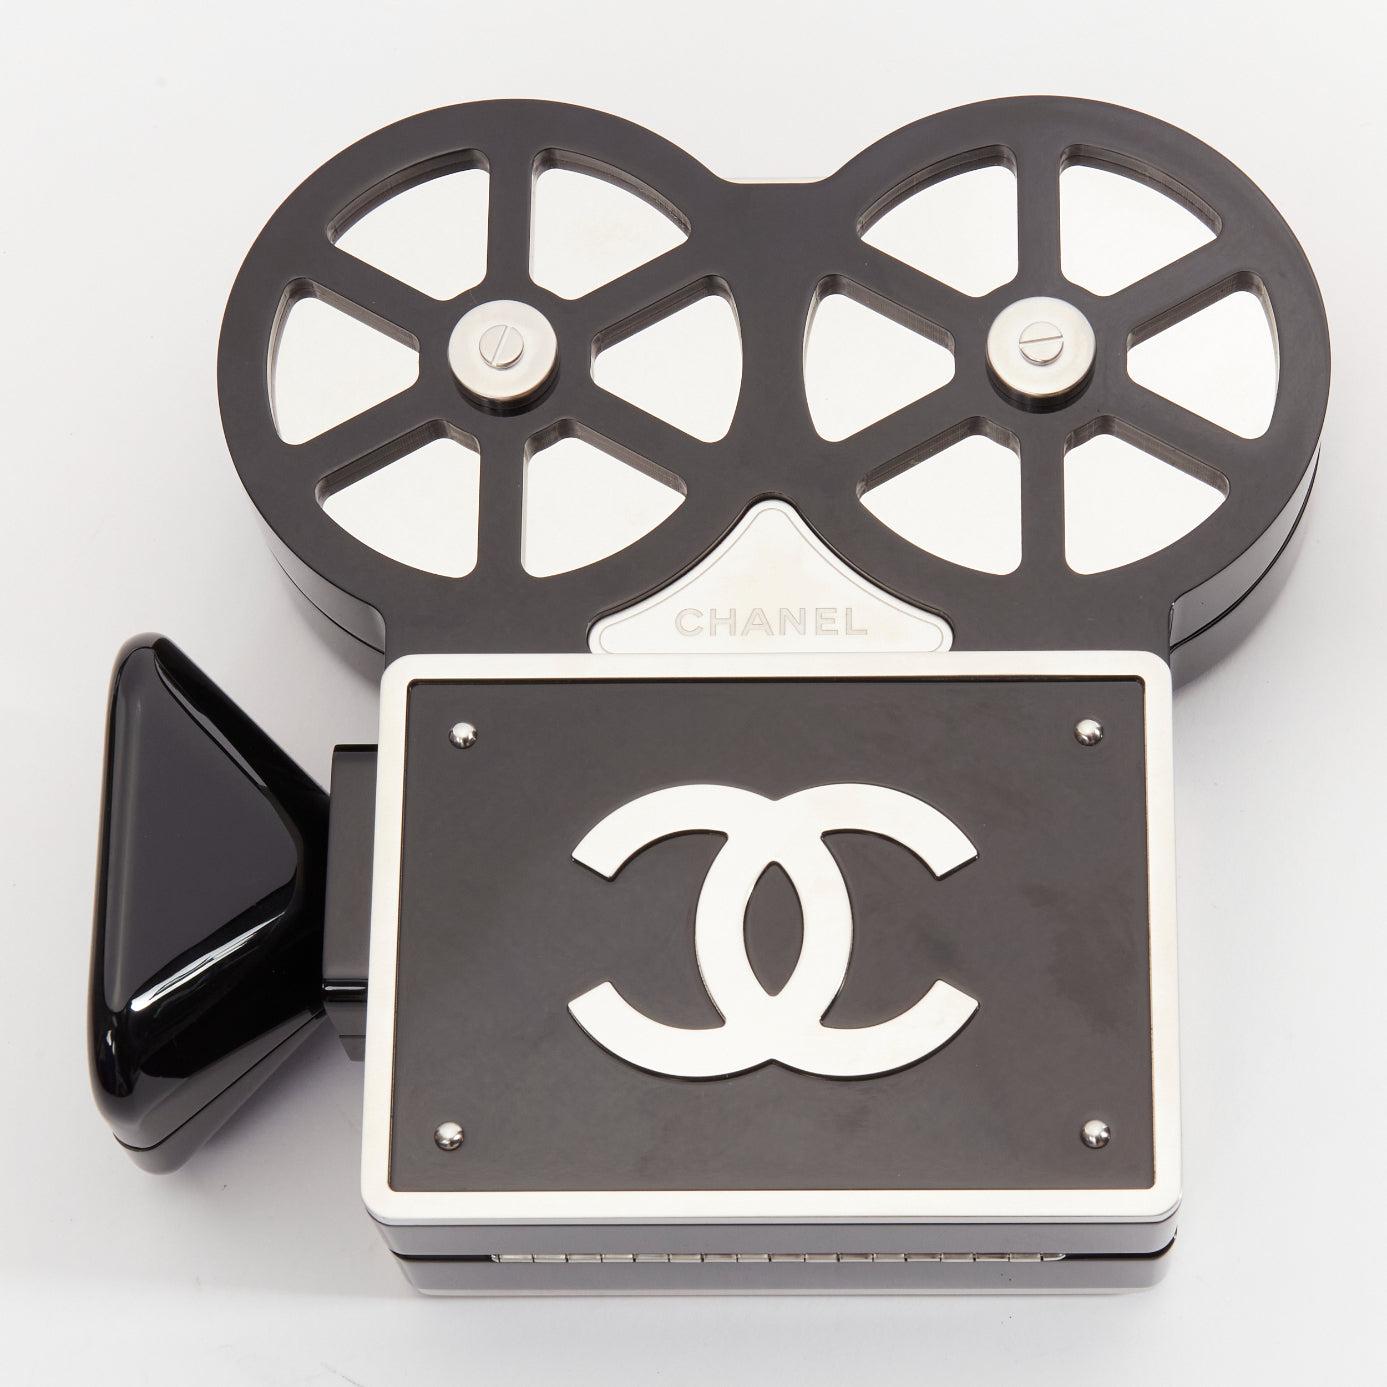 CHANEL 2016 Rome M√©tiers D‚Äôart Limited Edition Buonasera Film Projector Minaudiere bag
Reference: TGAS/D00764
Brand: Chanel
Designer: Karl Lagerfeld
Model: Buonasera Film Projector Minaudiere
Collection: 2016 Rome M√©tiers D‚Äôart
Material: